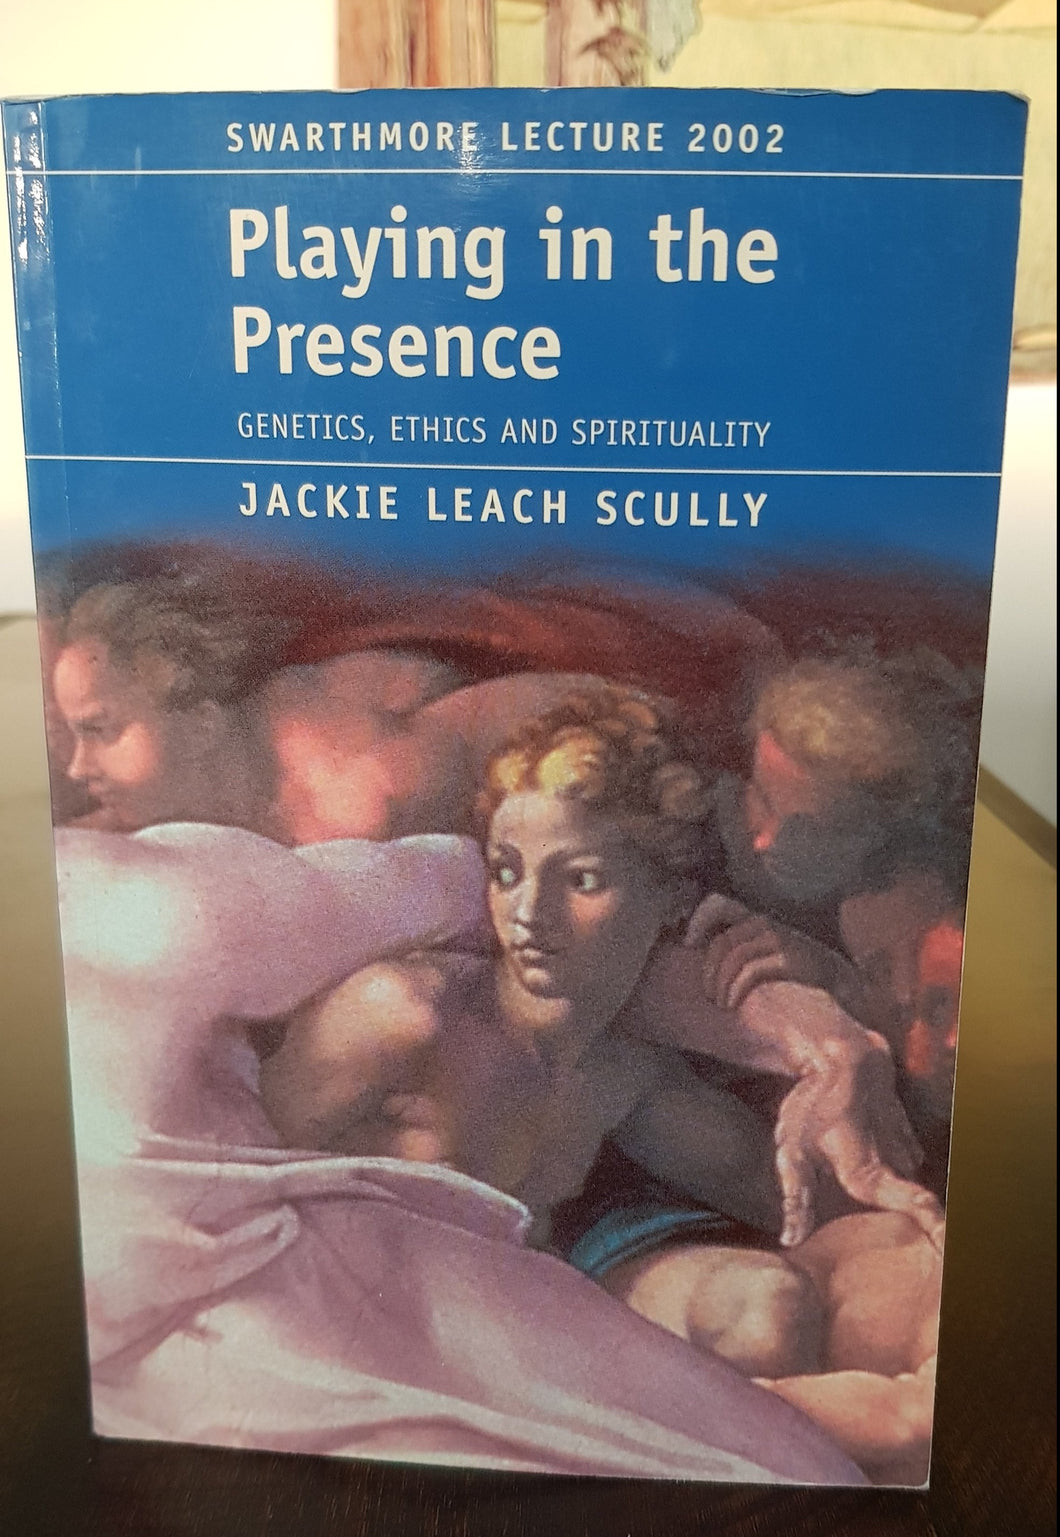 Playing in the Presence by Jackie Leach Scully